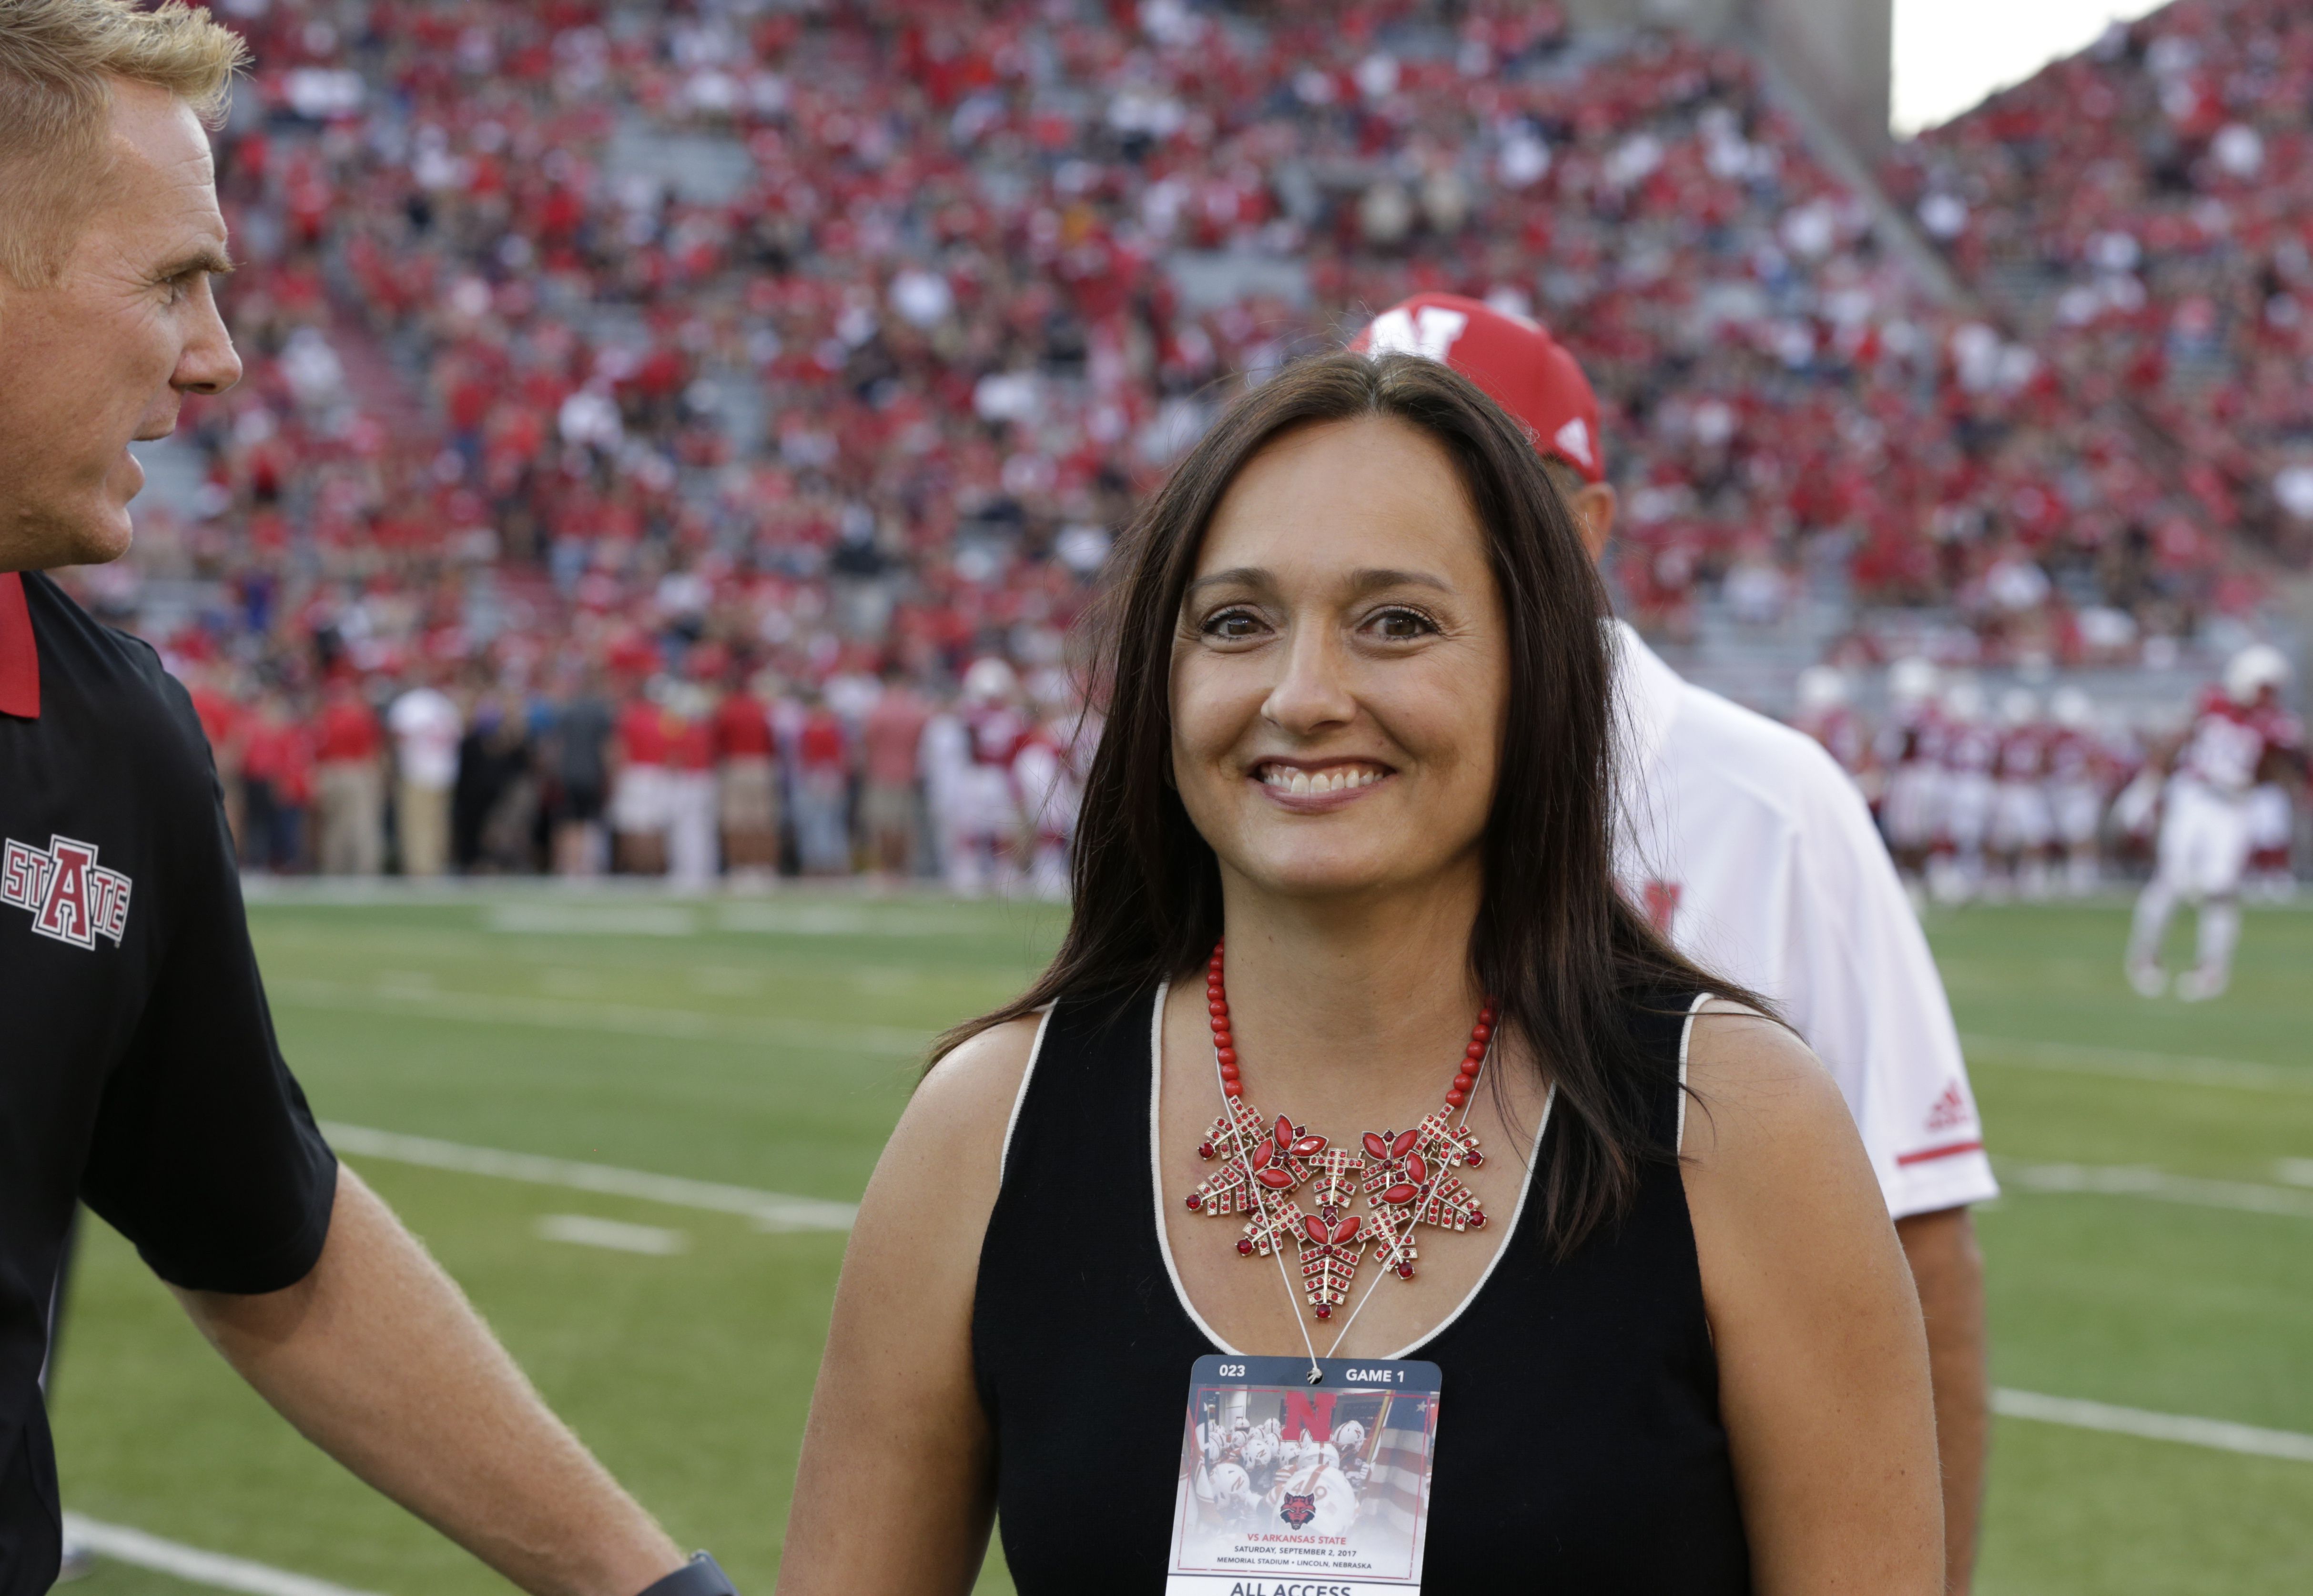 Wendy Anderson, wife of Arkansas State football coach, dies